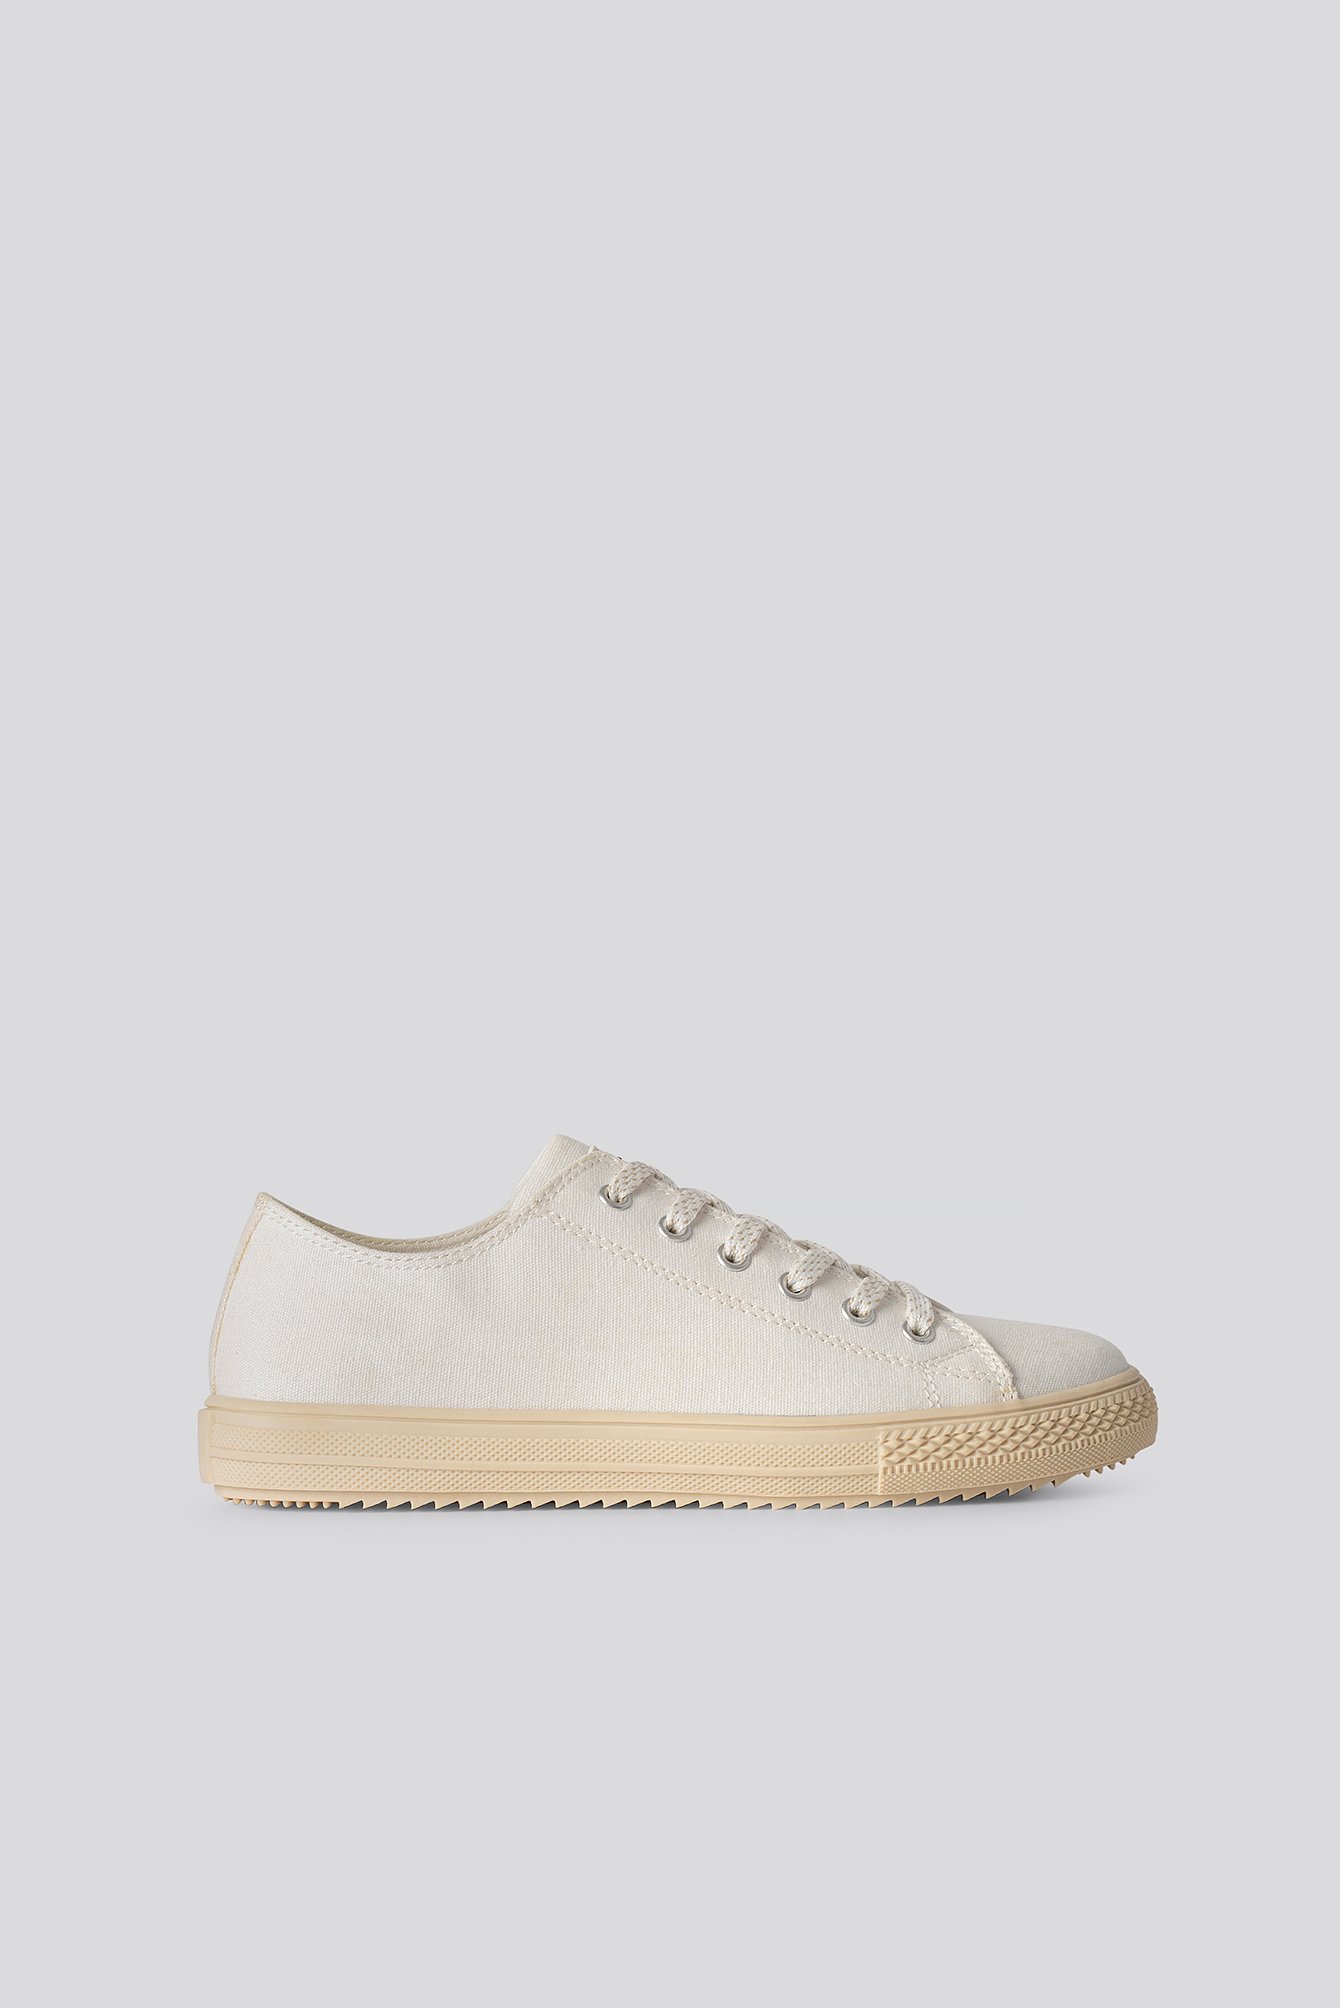 White/Beige Rubber Sole Canvas Trainers